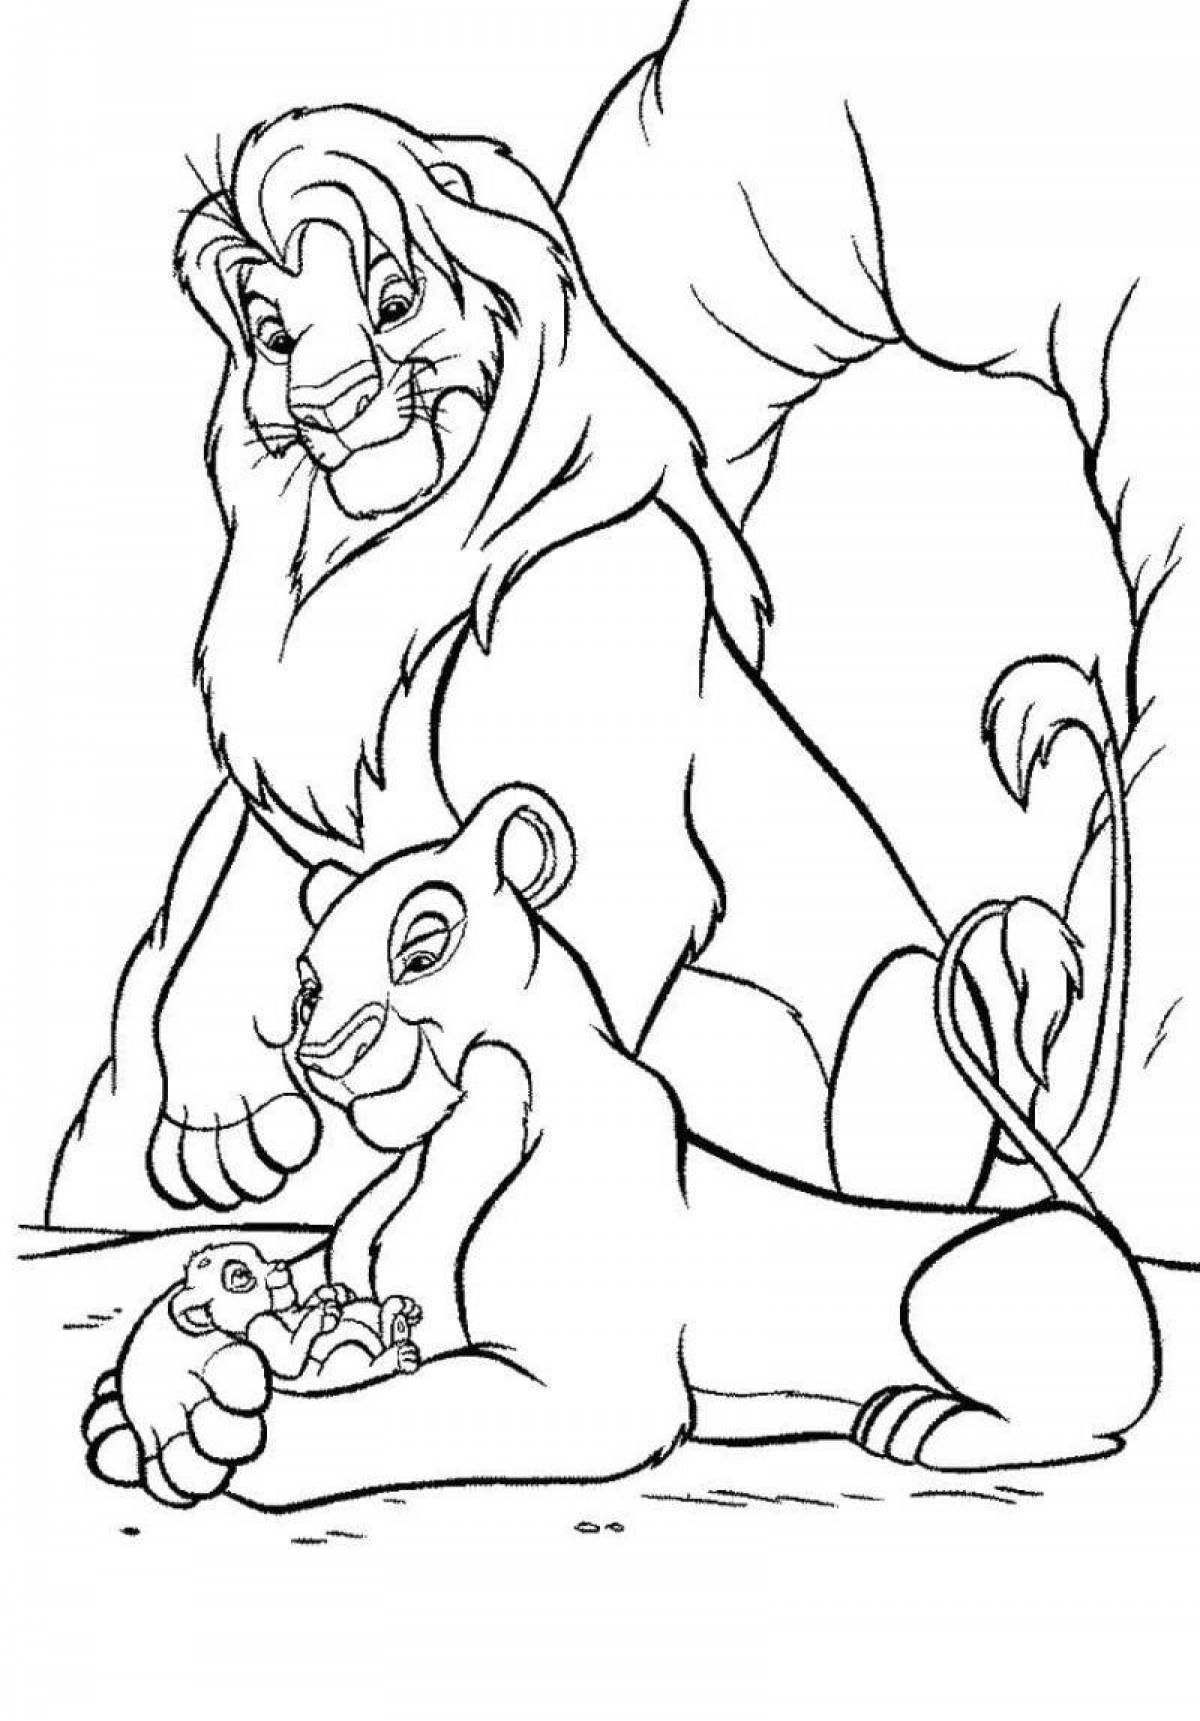 The shining lion king coloring page